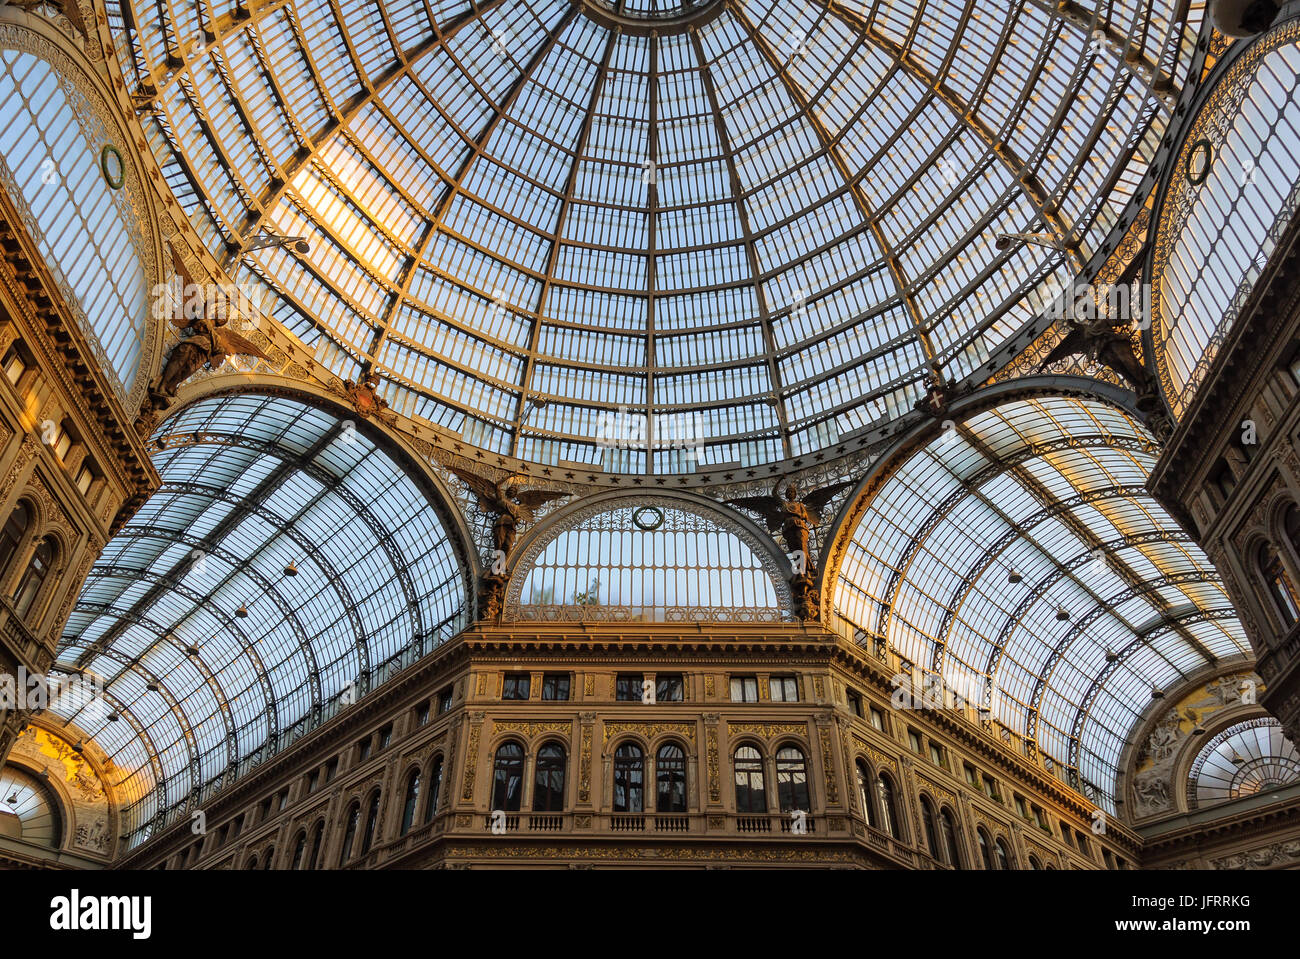 Glass roof and arching dome of Galleria Umberto I - Naples, Campania, Italy Stock Photo